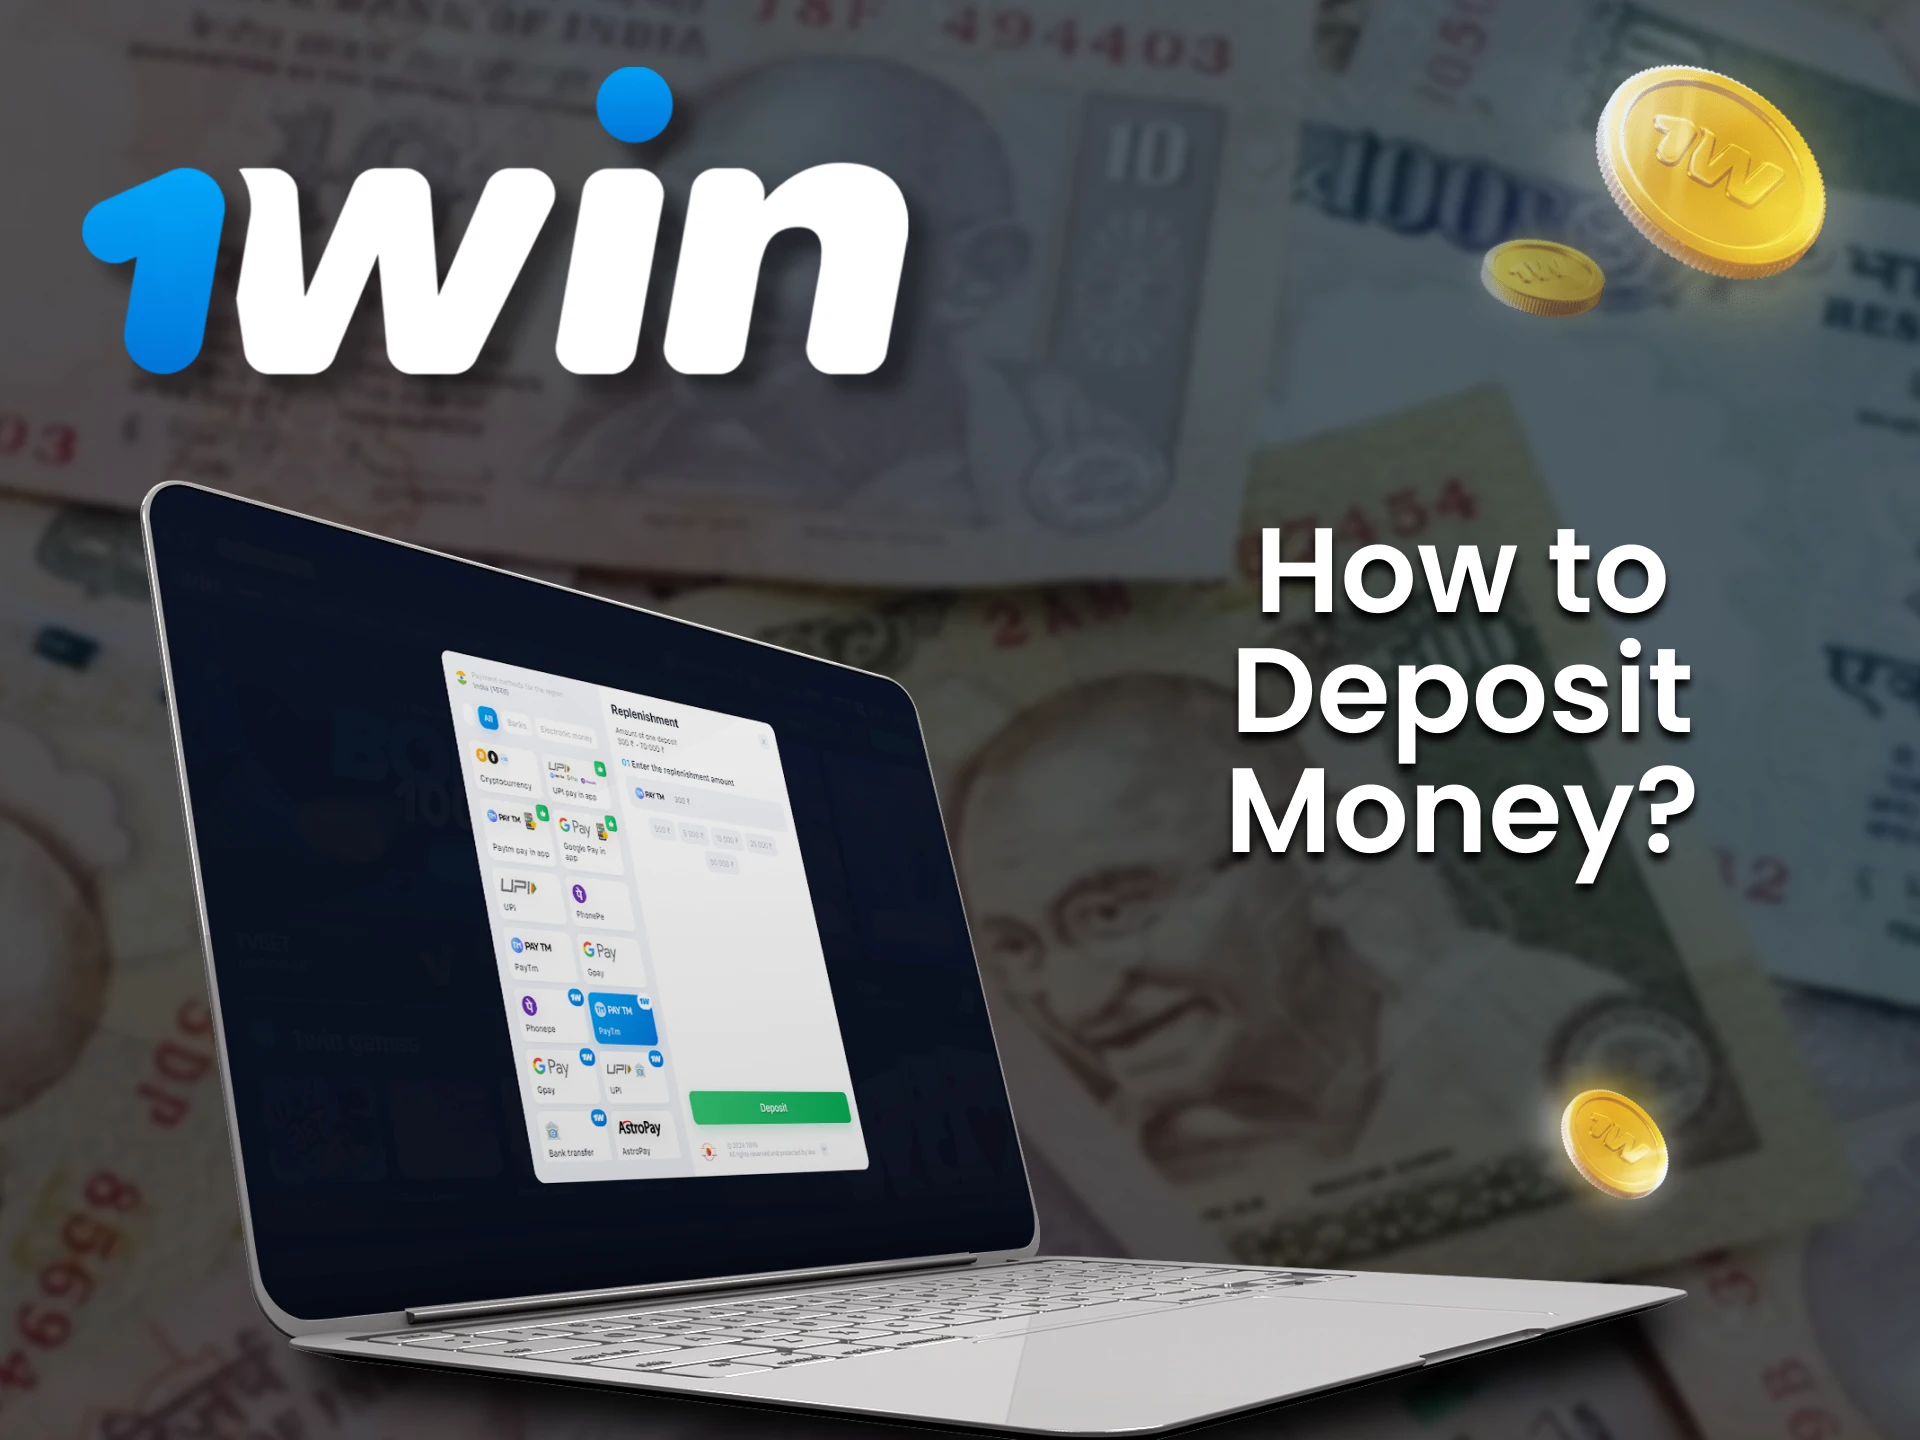 We’ll tell you how to replenish your deposit on the 1win website.